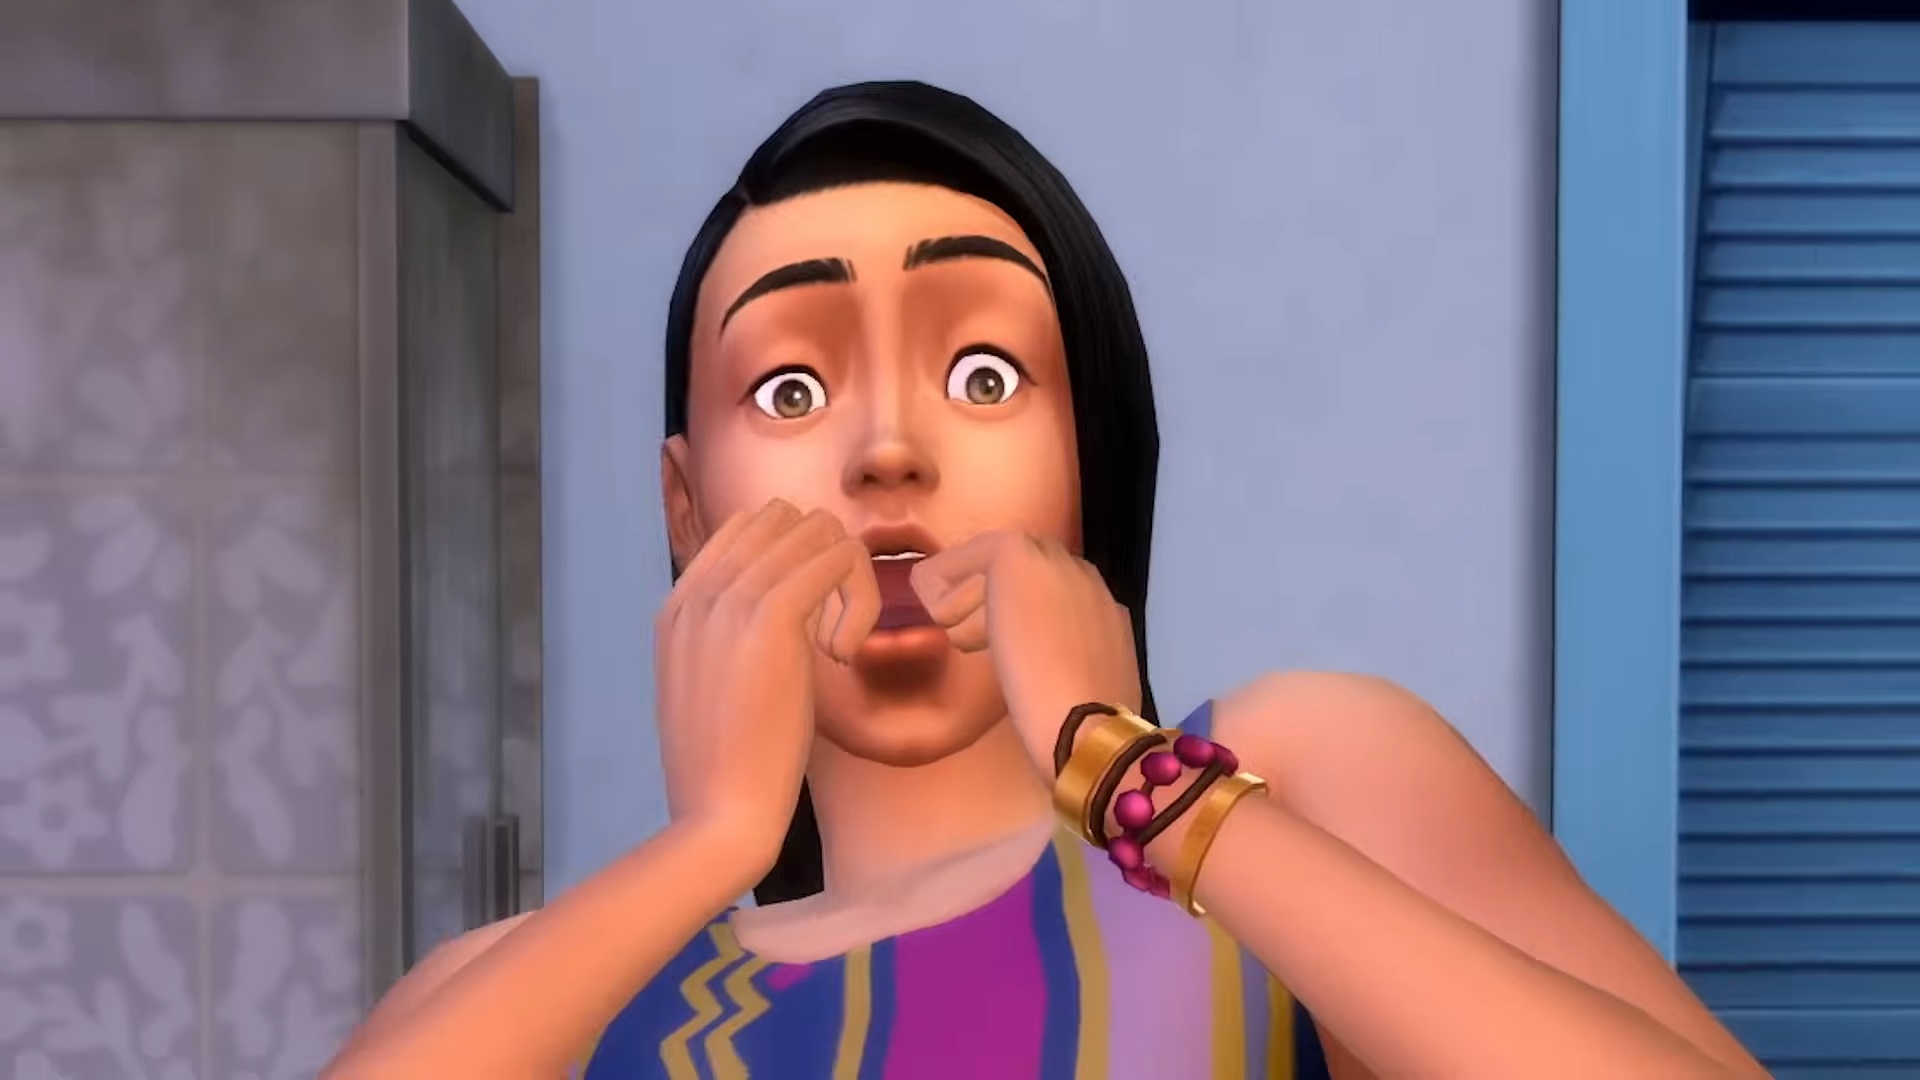 The Sims 4 - a Sim reacting with shock